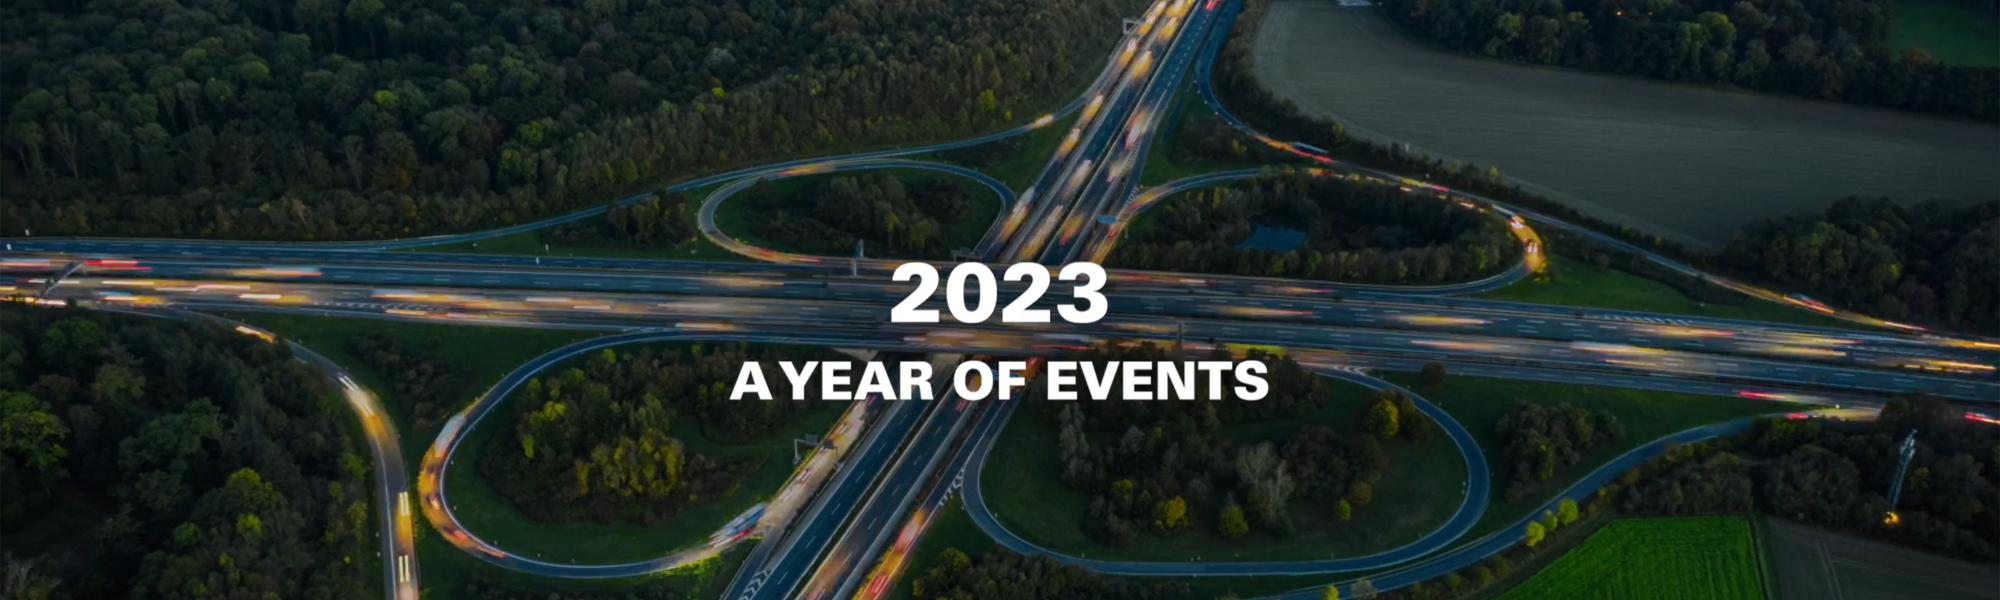 2023 was a year of events for IRU: Over 6,000 participants, 103 speakers, 82 countries. Join us in 2024. Shape road transport.